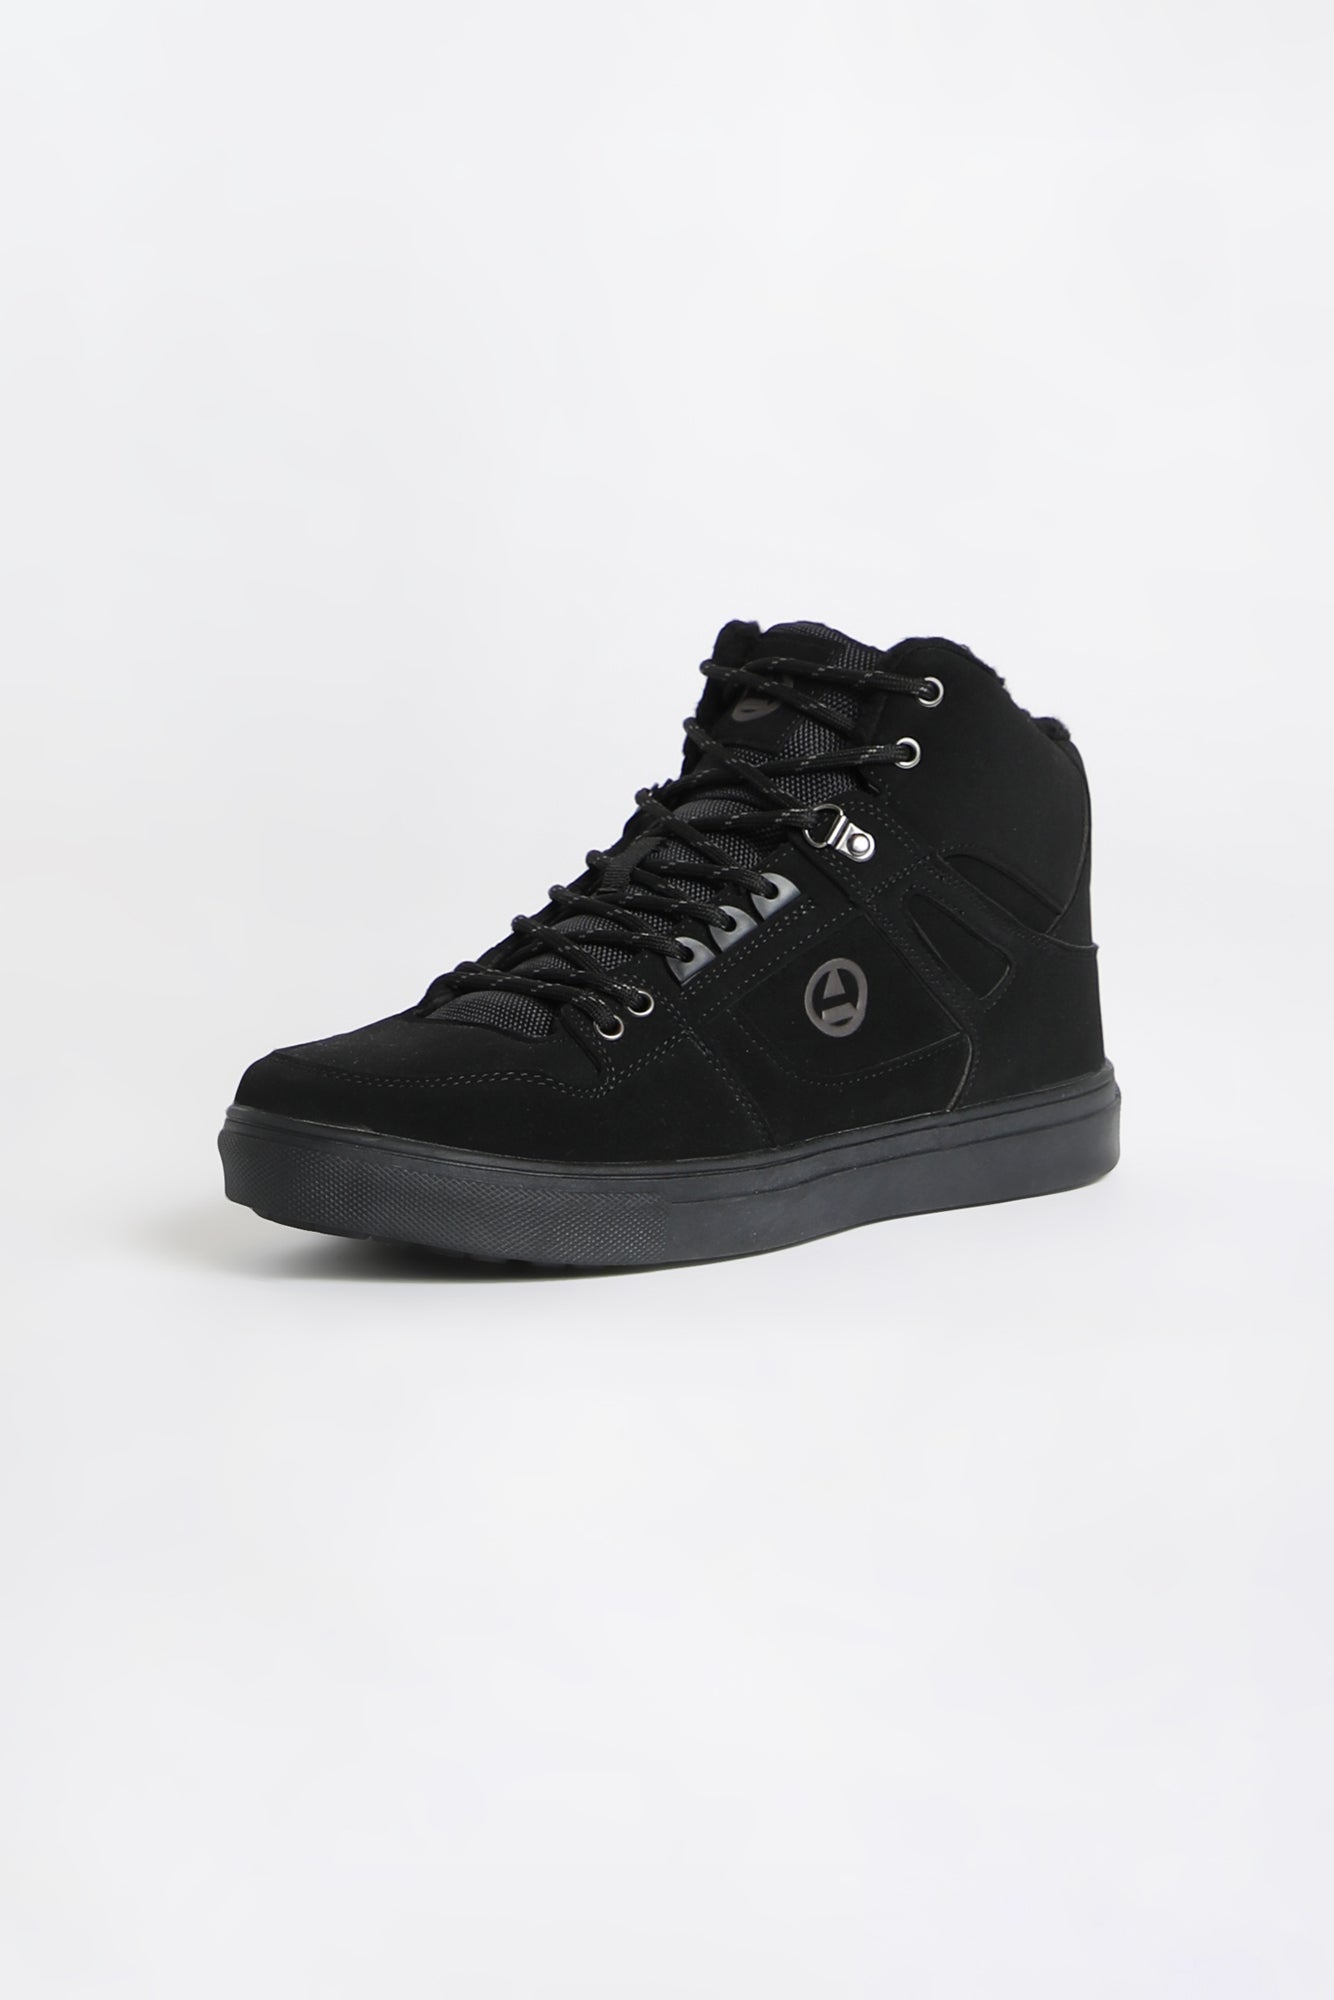 Amnesia Youth Nubuck Faux Fur Lined Skate Boots - /